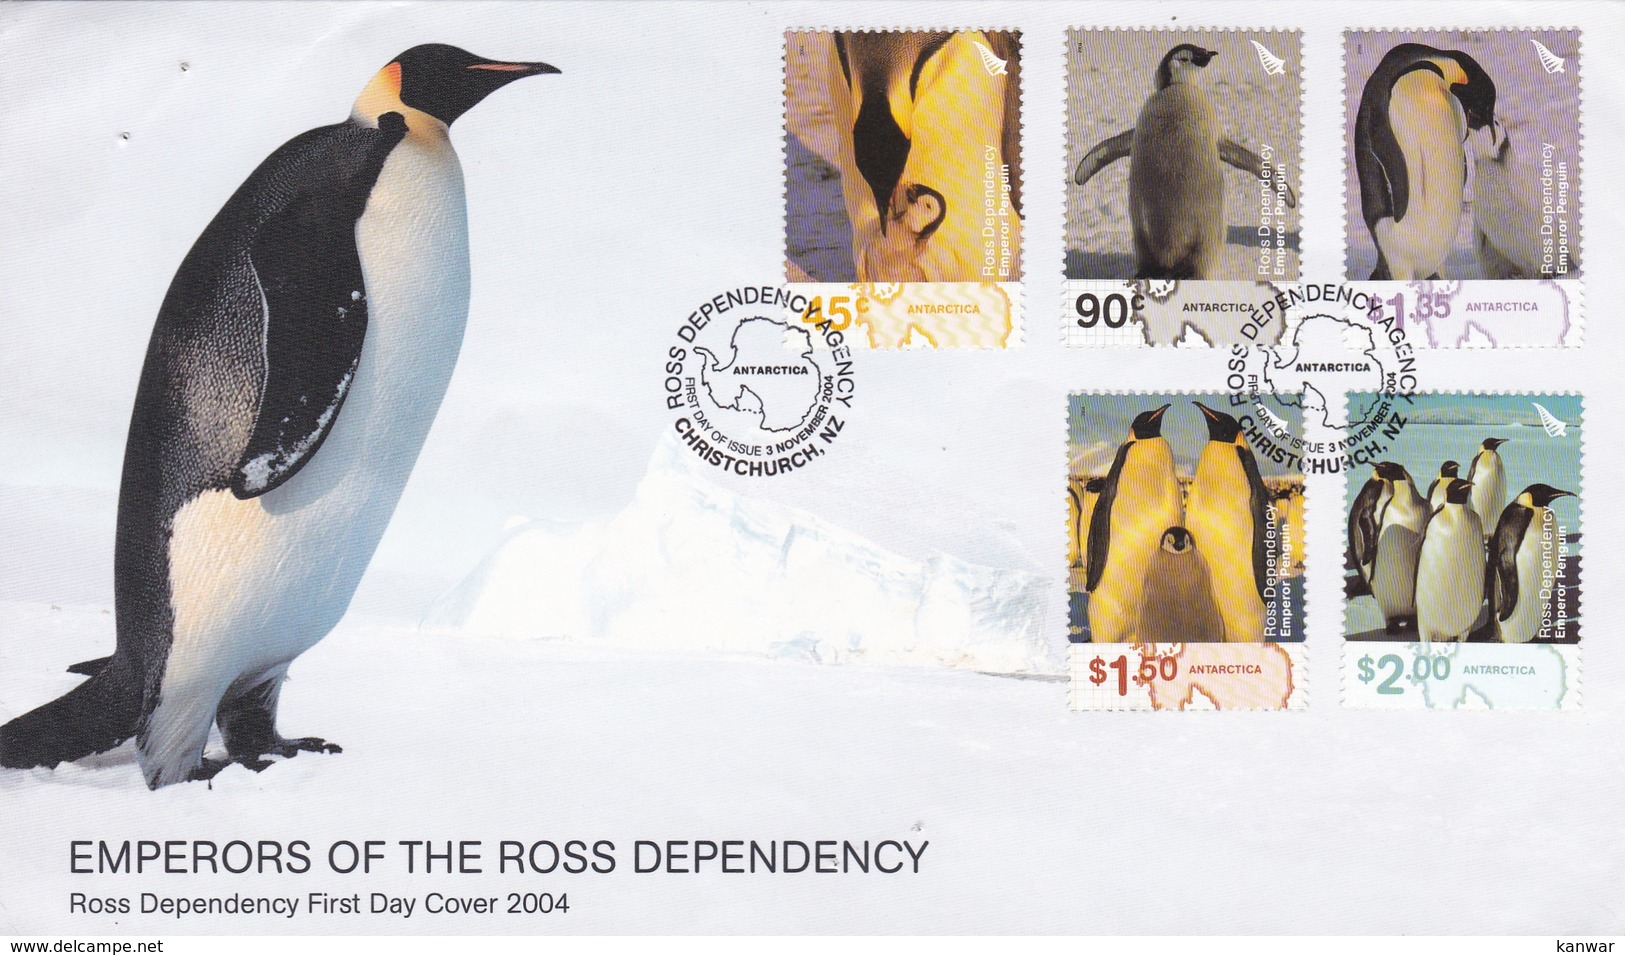 2004 ROSS DEPENDENCY EMPERORS PENGUIN FDC - FDC